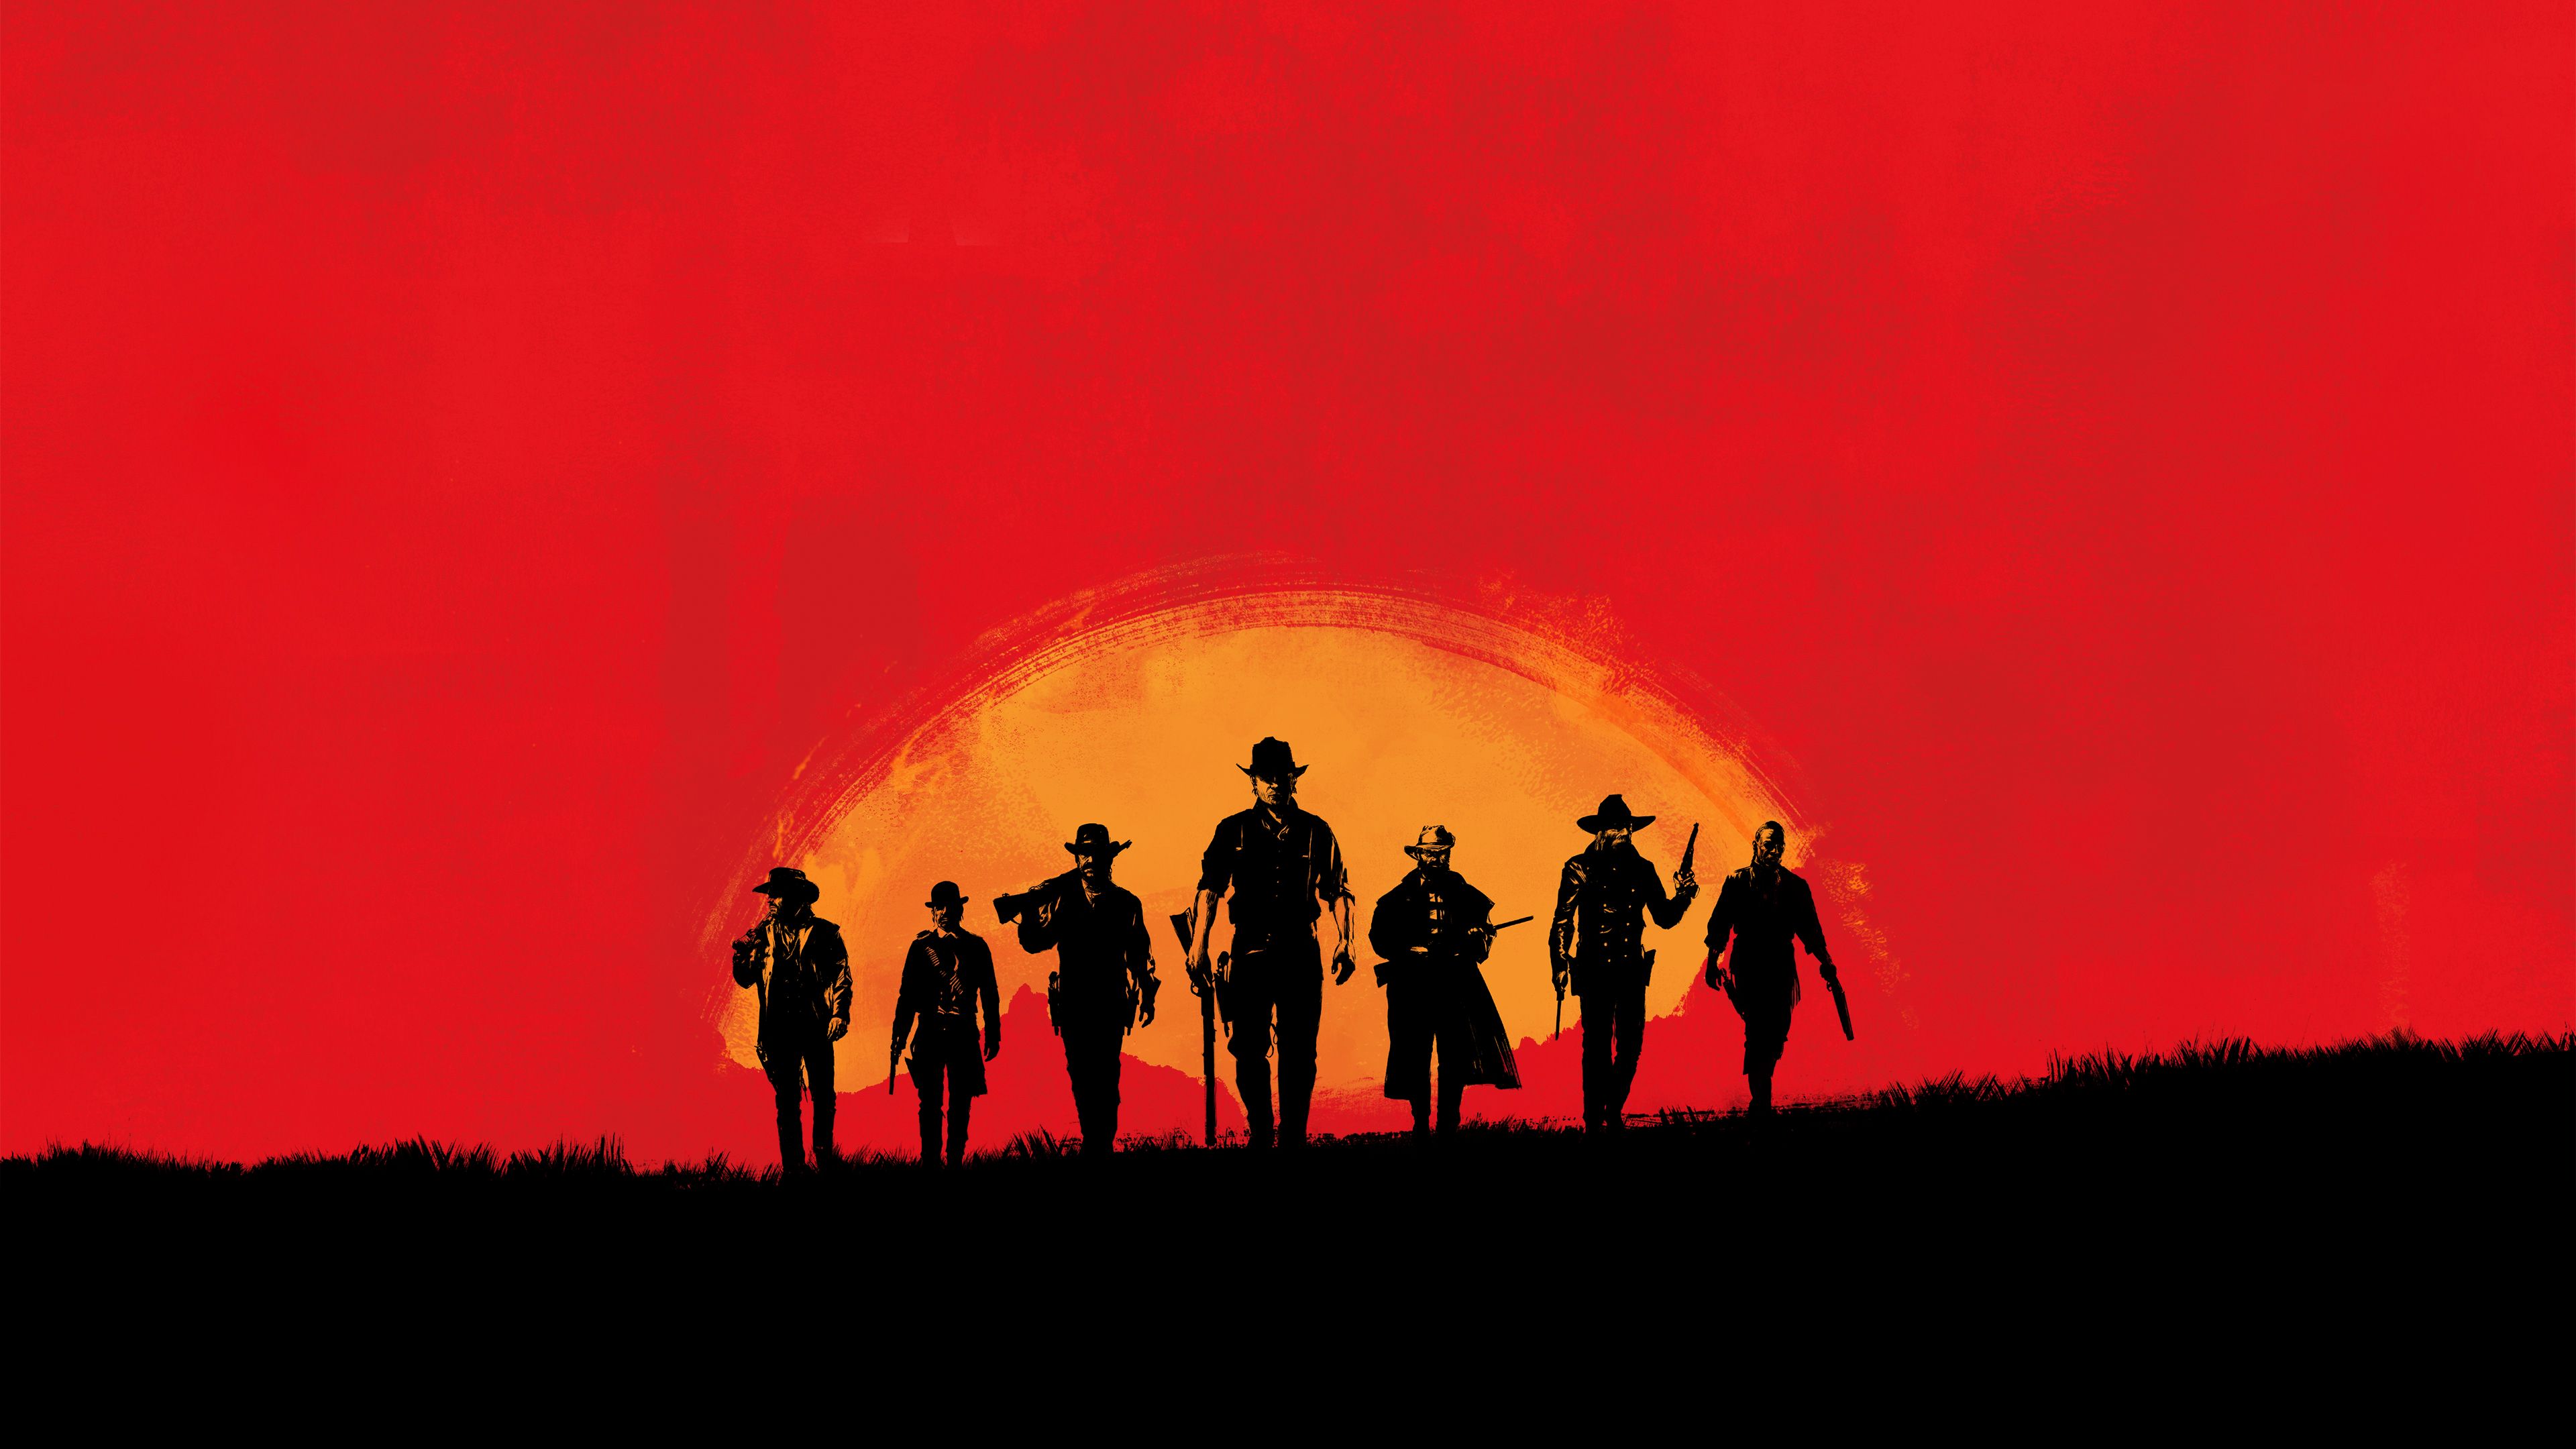 Cool Red Dead Redemption 2 HD Wallpaper